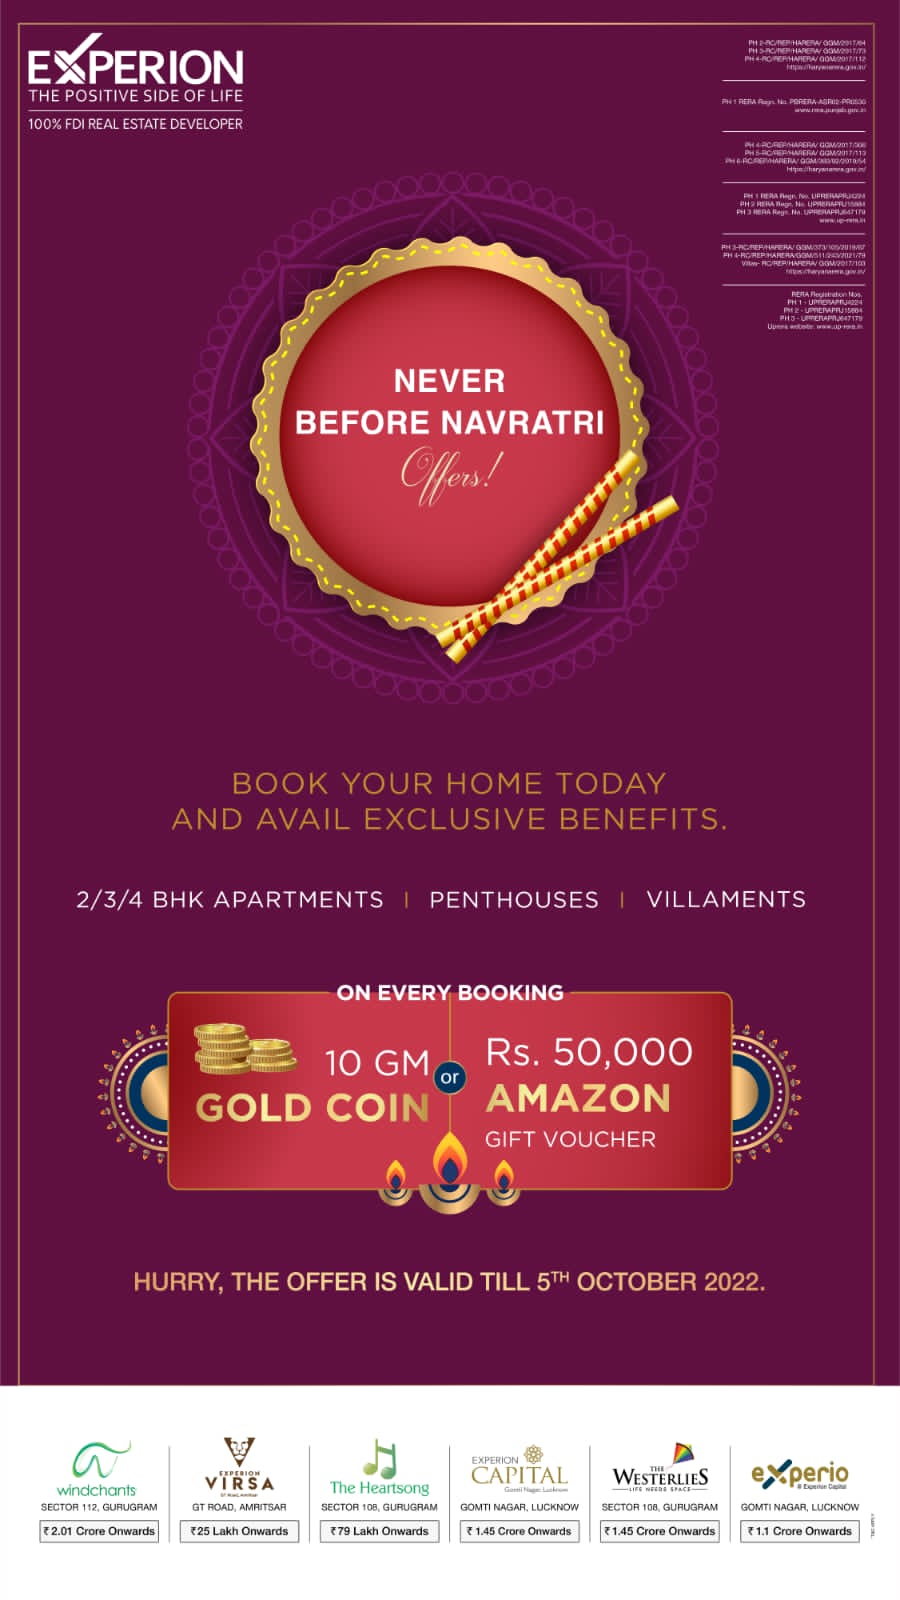 Book your home today and avail exclusive benefit at Experion Developers Update